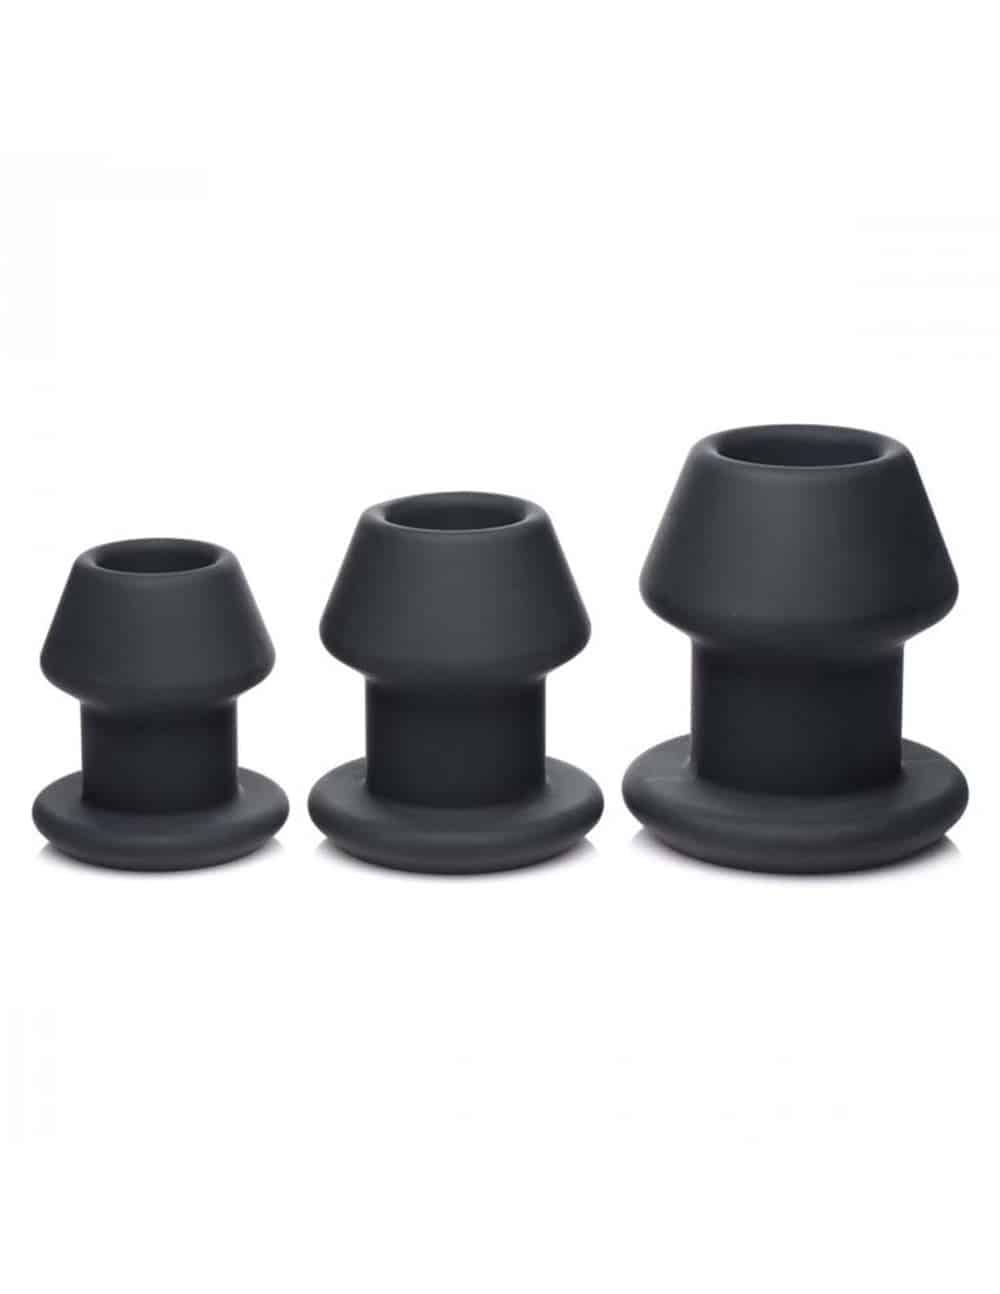 Product Master Series Gape-Grommets